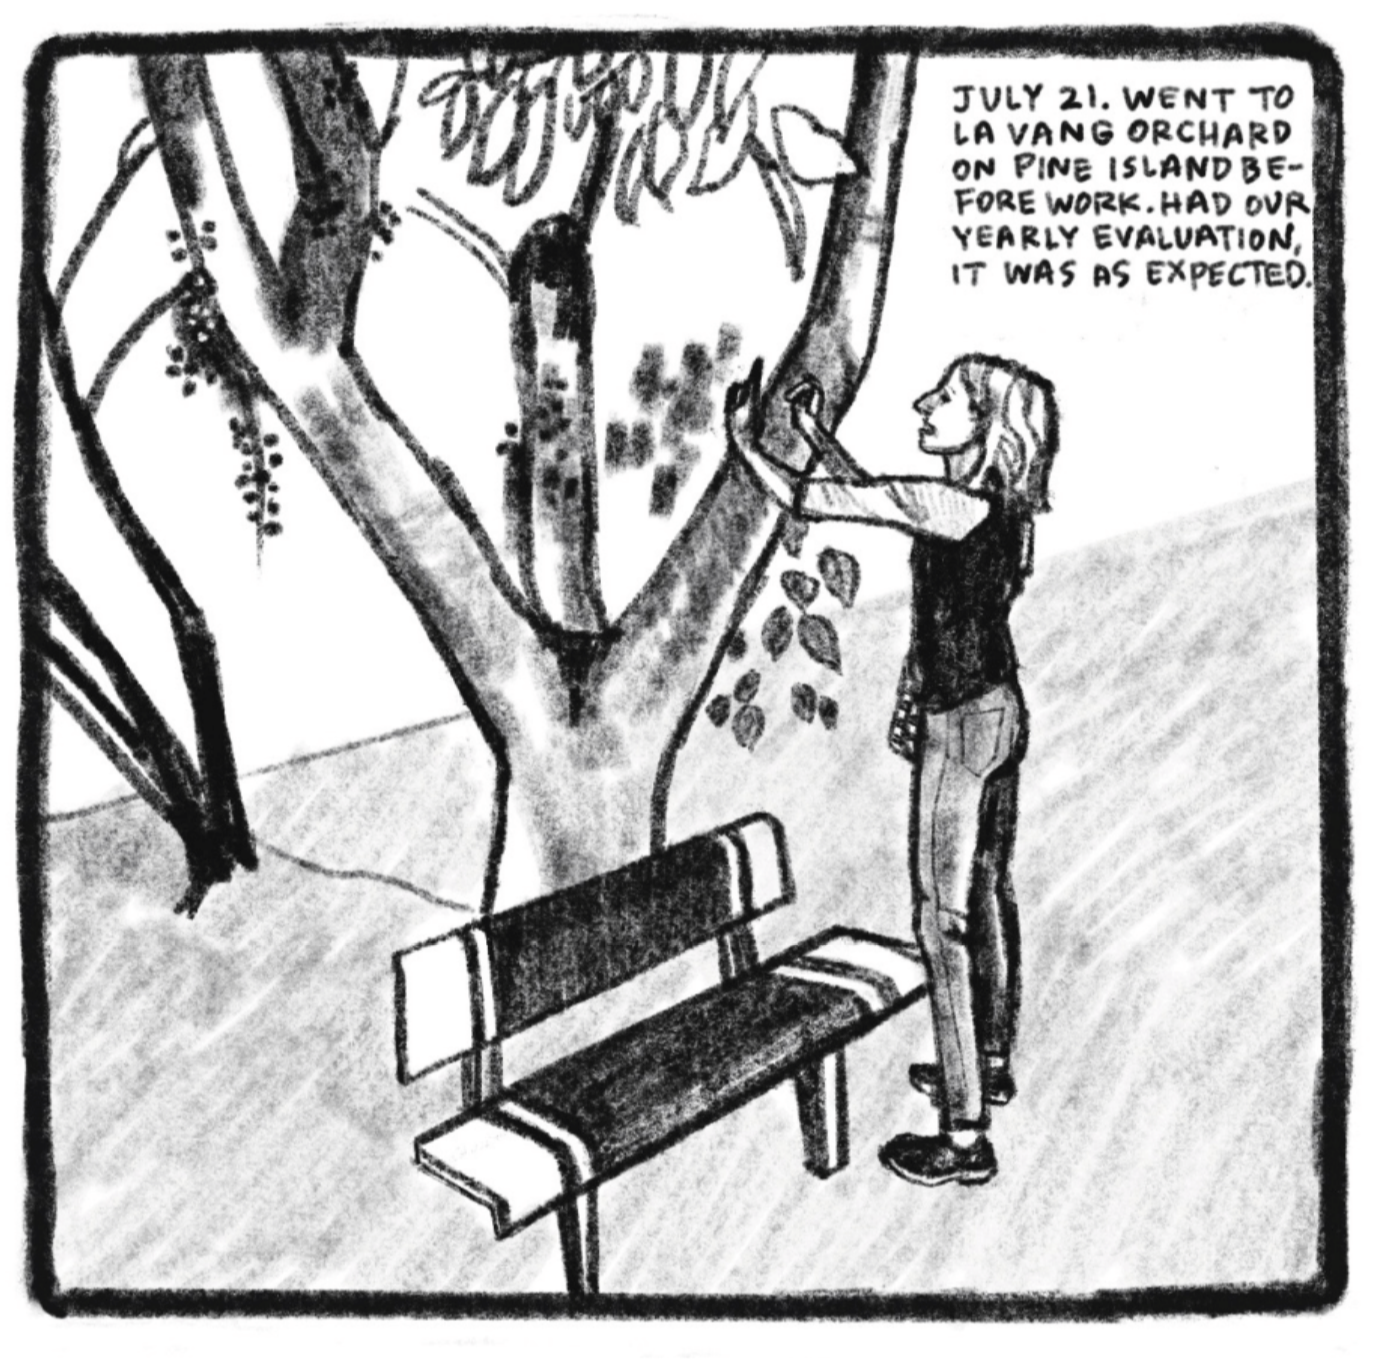 2. Kim stands outside in front of a park bench and a tree. The tree has a short trunk which then divides into three main branches; some leaves come down from overhead. Kim is holding her hands out towards the tree, making a frame with her fingers as if to measure the proportions of the tree for a drawing reference. She is wearing a baseball tee, skinny jeans, and loafers. She is smiling while observing the tree. â€œJuly 21. Went to La Vang Orchard on Pine Island before work. Had our yearly evaluation. It was as expected.â€